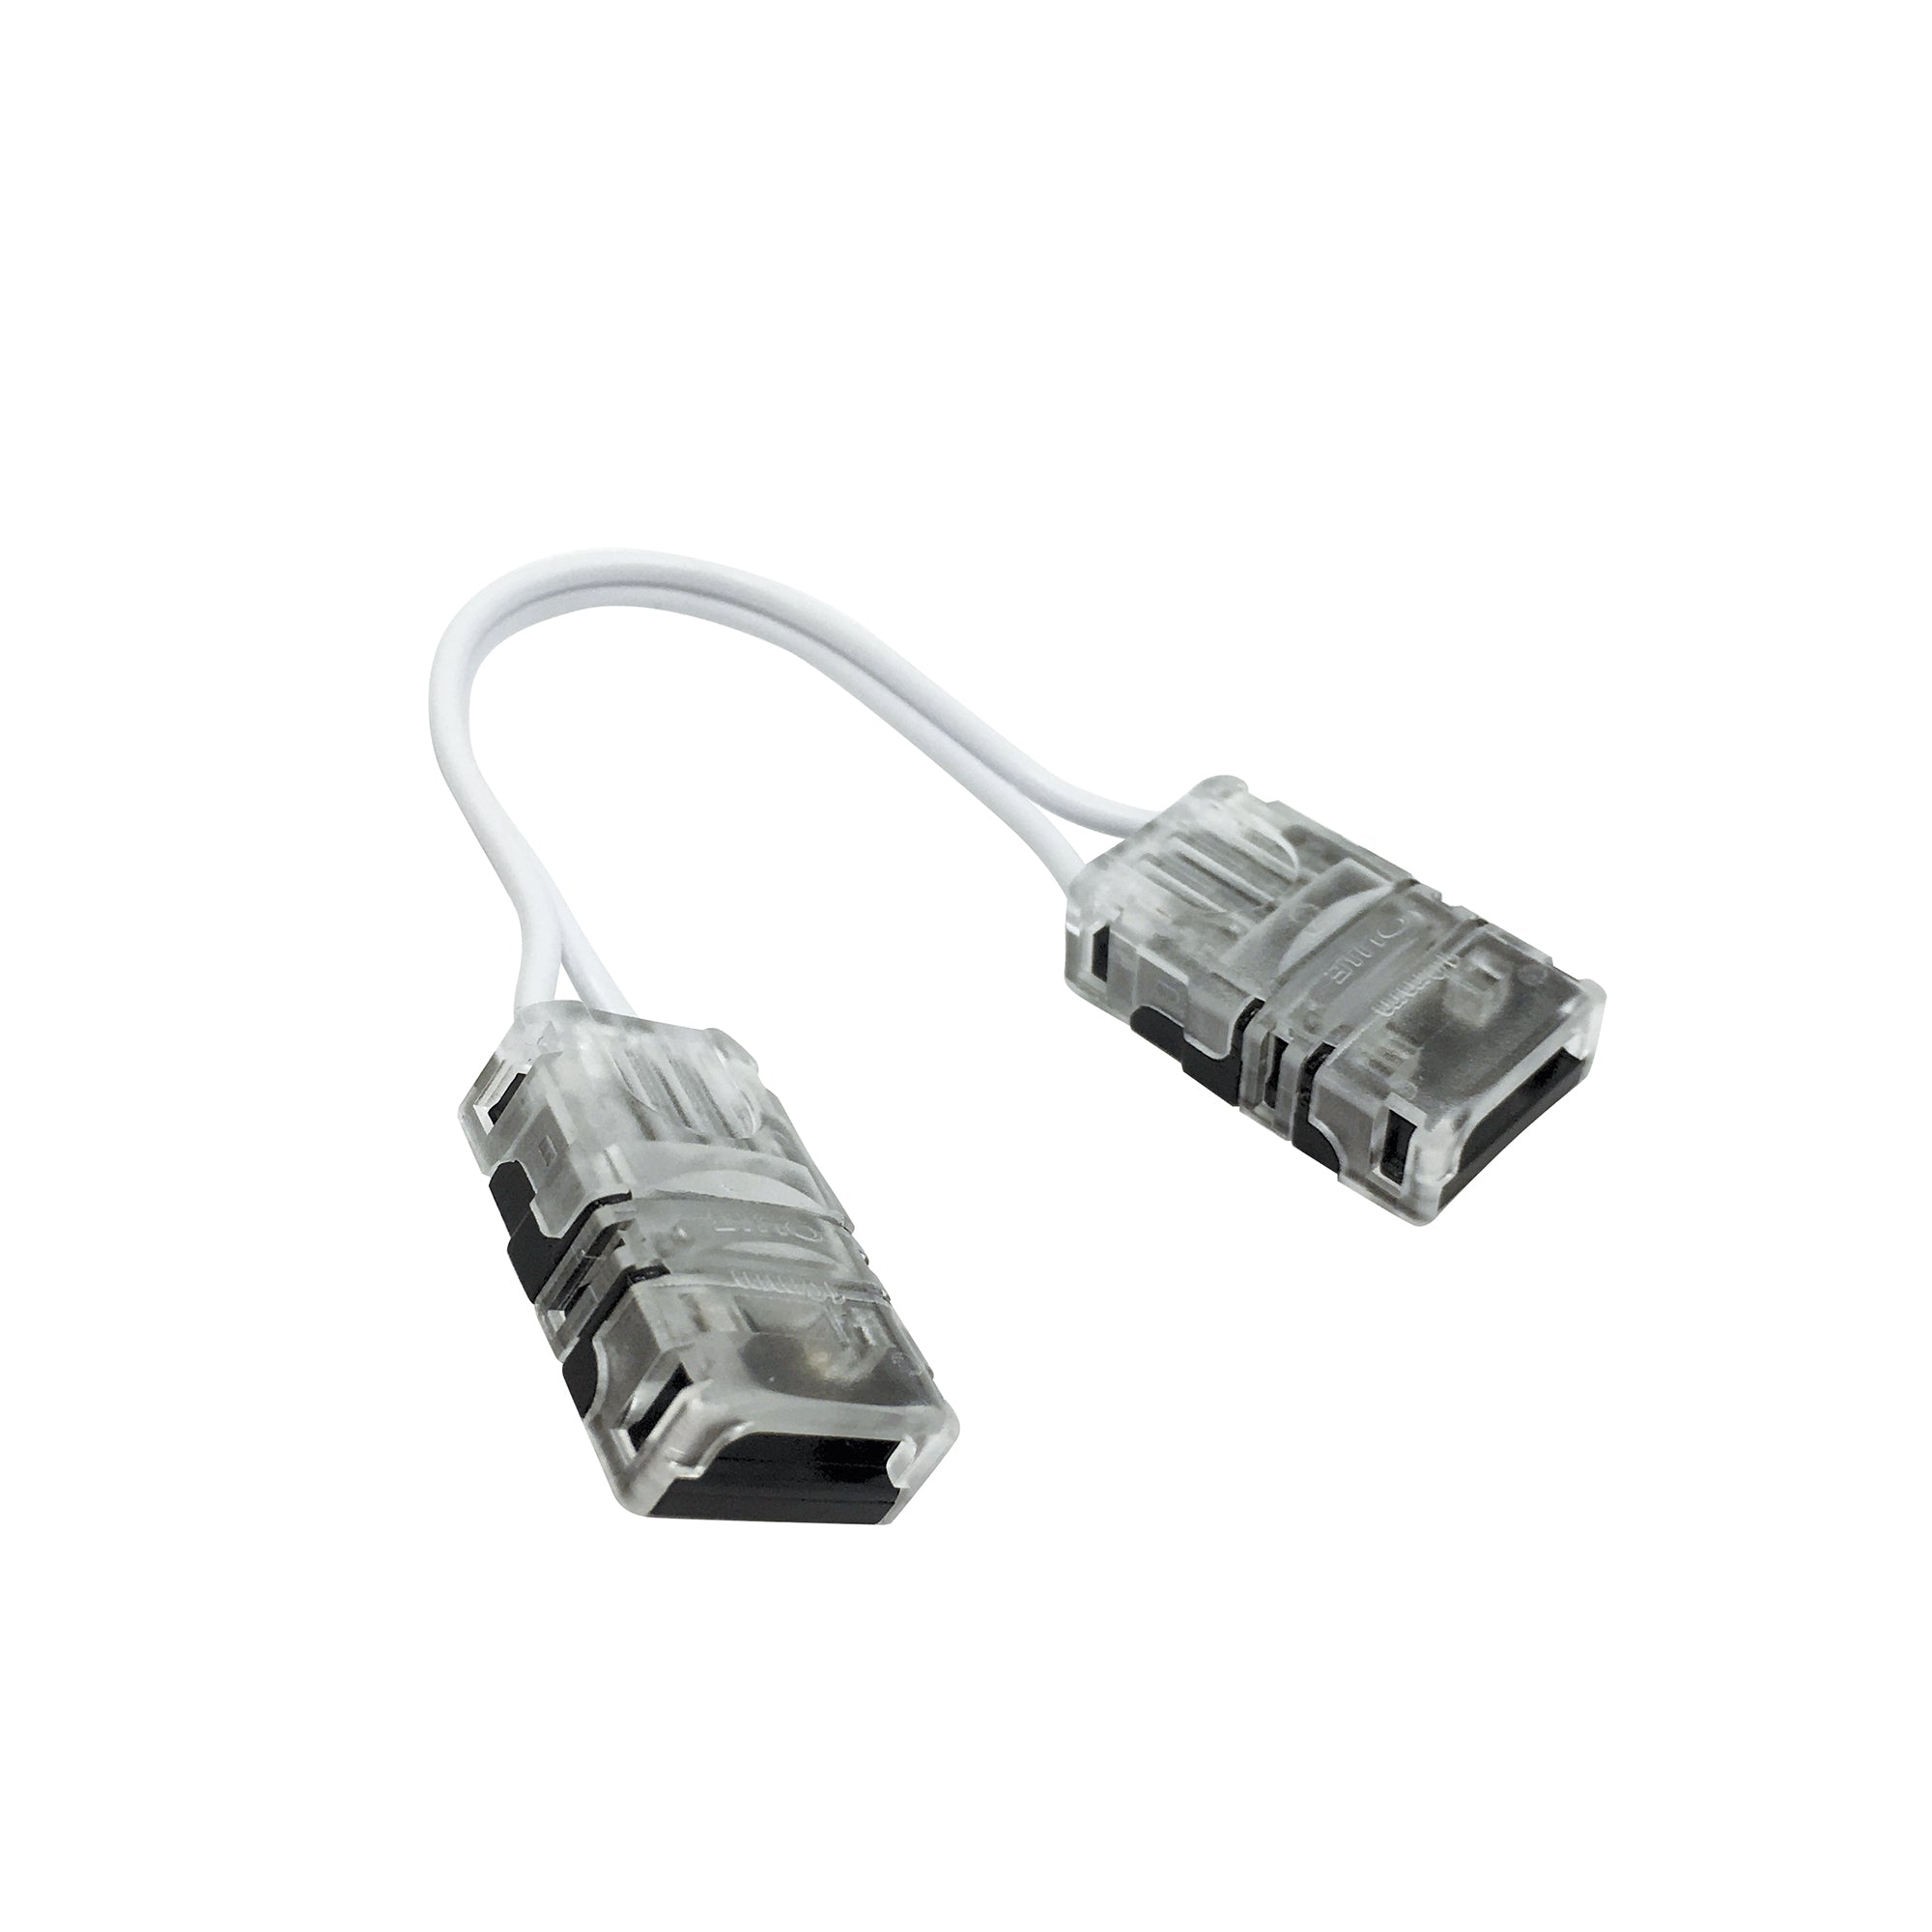 Nora Lighting NATLCD-224 24" Interconnection Cable For NUTP12 Comfort Dim Tape Light - White